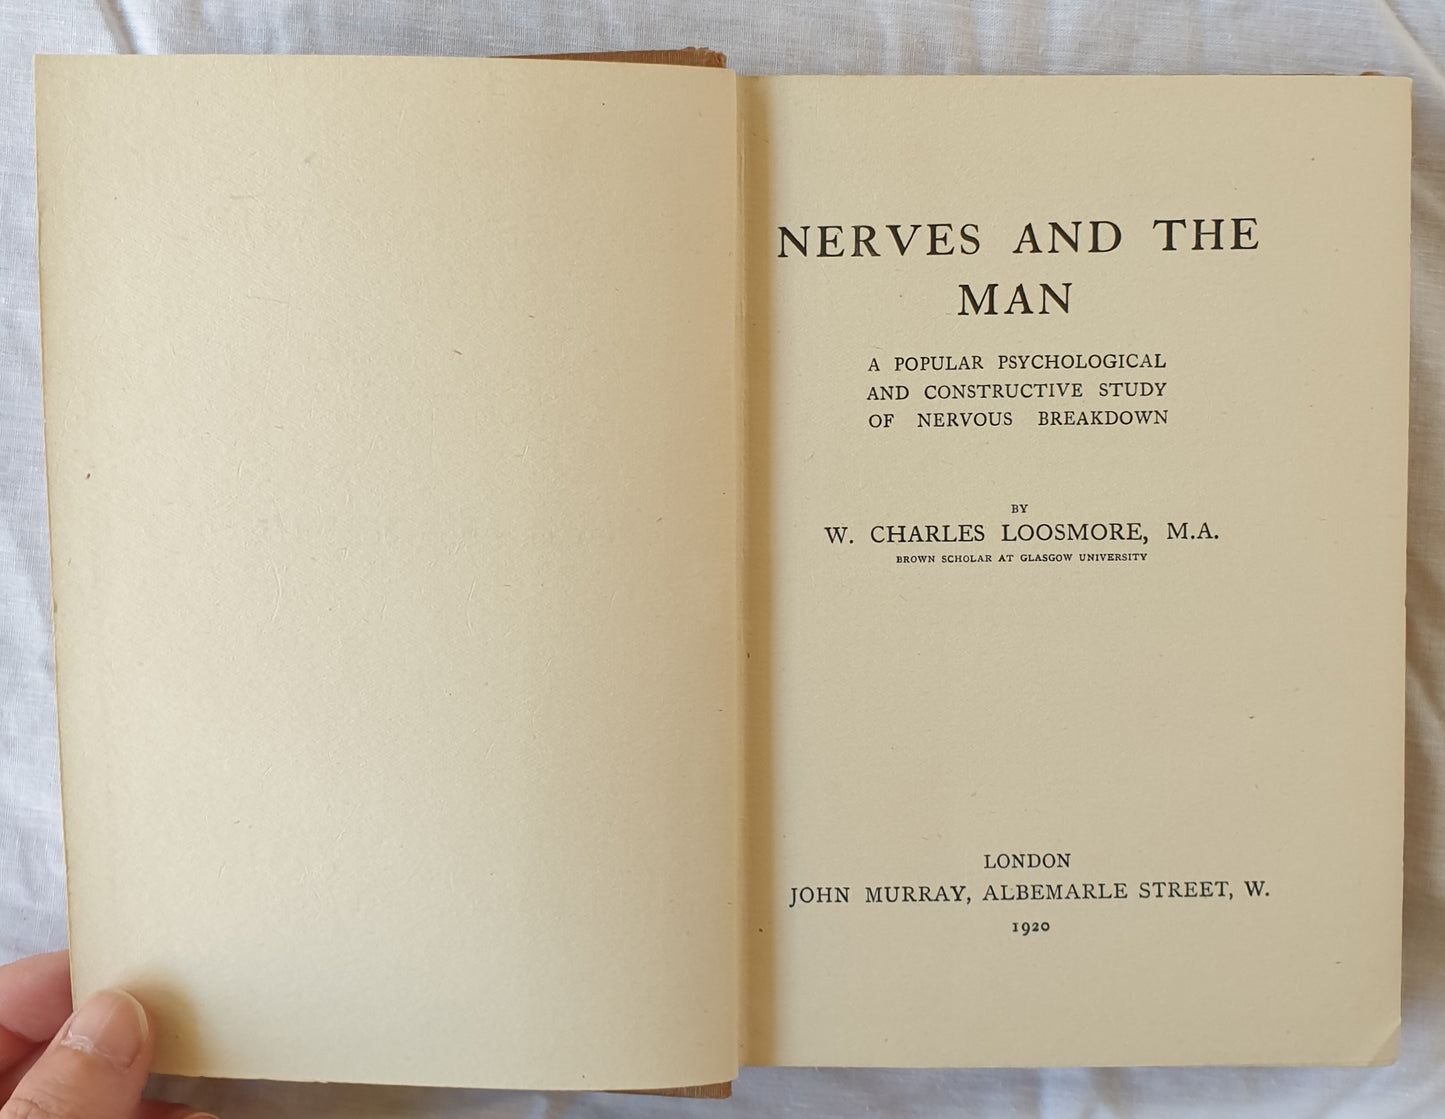 Nerves and the Man by W. Charles Loosmore